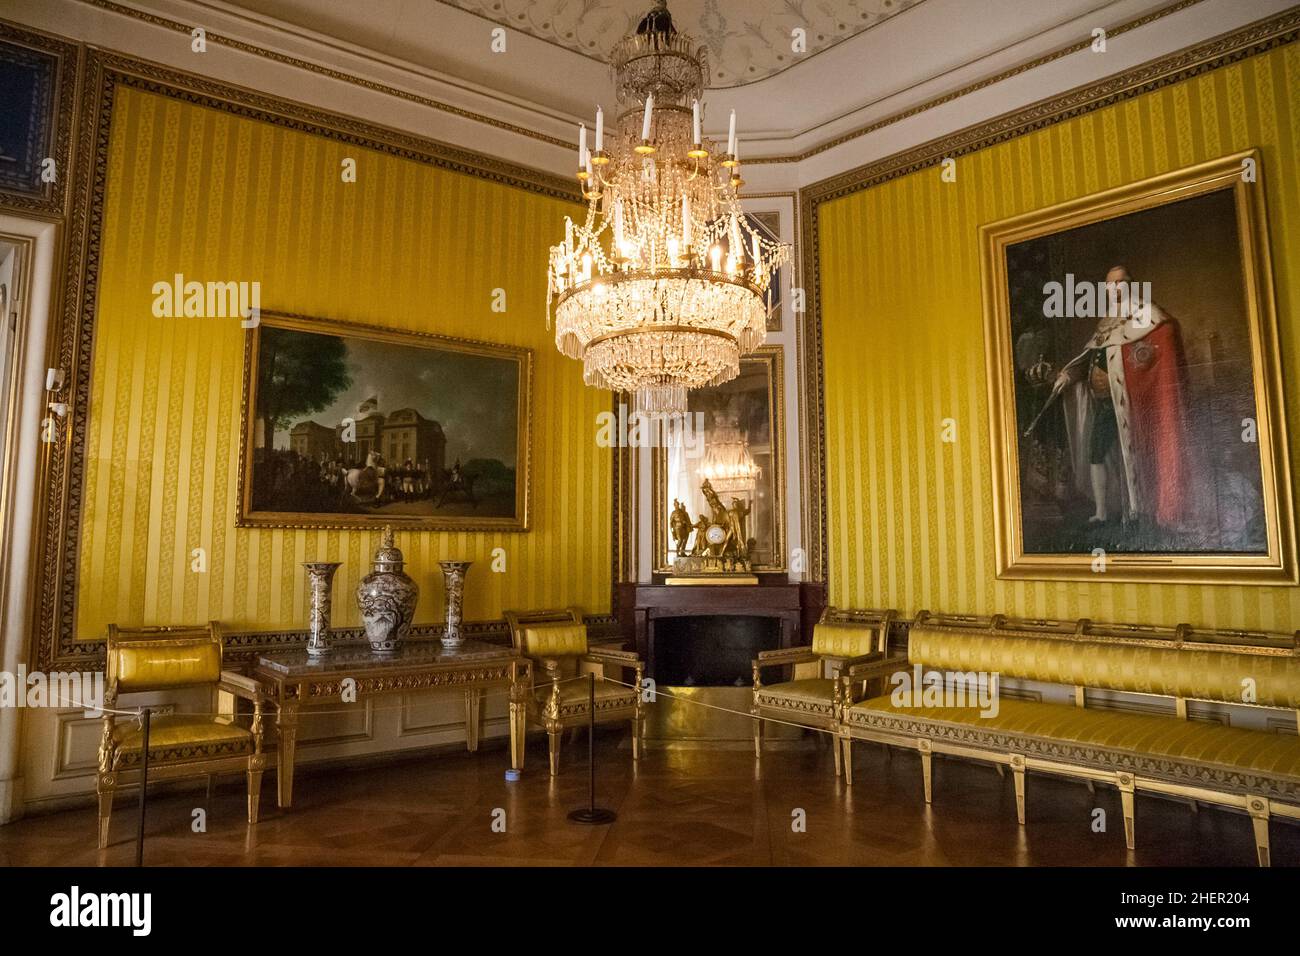 Inside King Friedrich I's royal assembly room with yellow silk damask wall coverings at Ludwigsburg Residential Palace, Germany. Antique and... Stock Photo